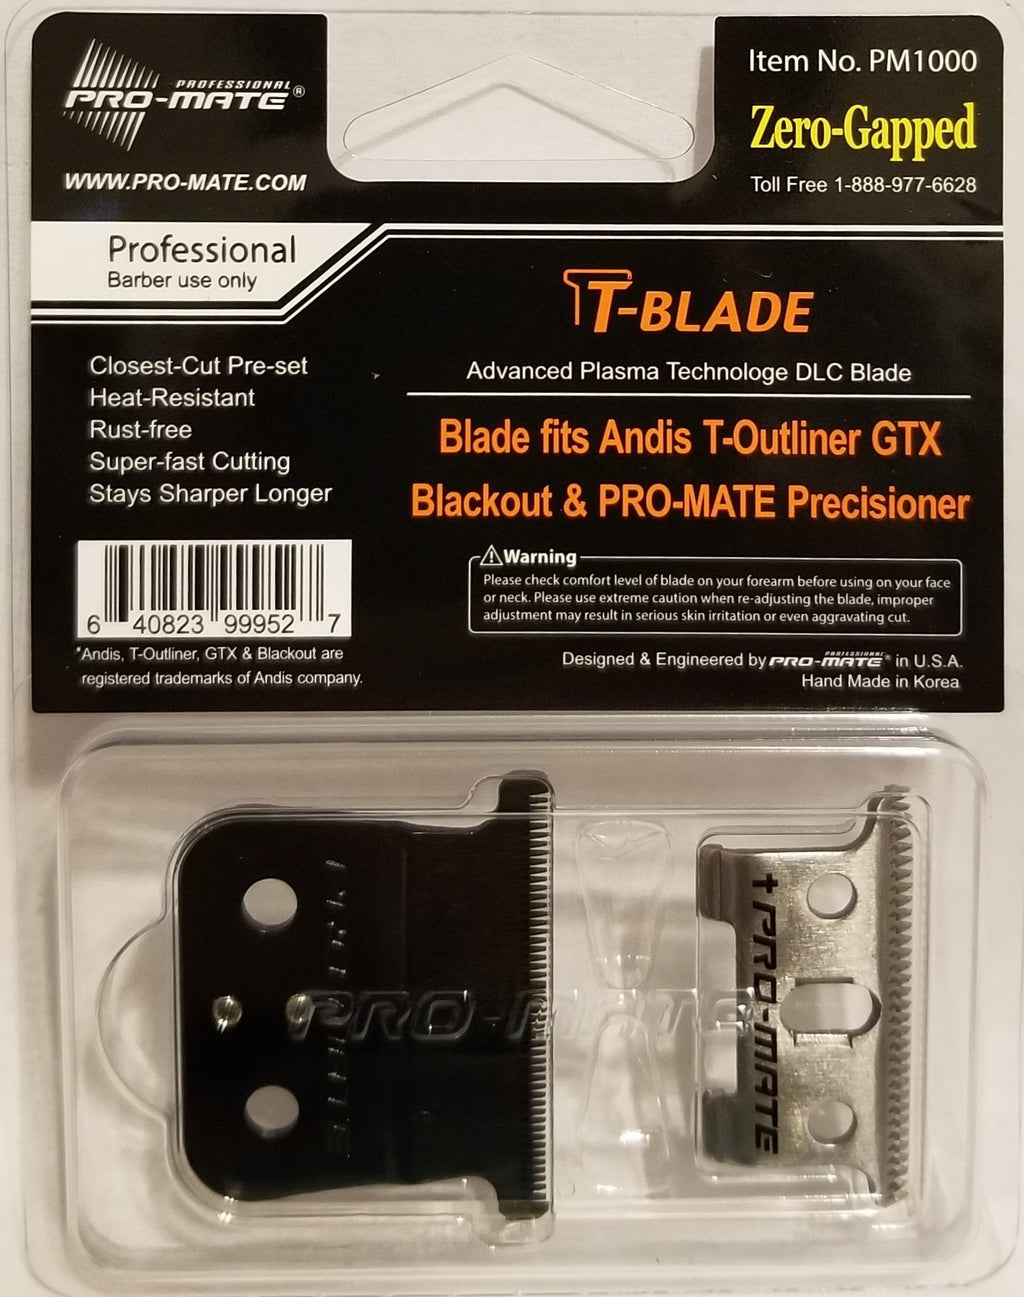 [Australia] - Pro-Mate Trimmer Blade Advanced Plasma Fits Andis T-Outliner & Pro-Mate Precisioner Trimmers PM1000 